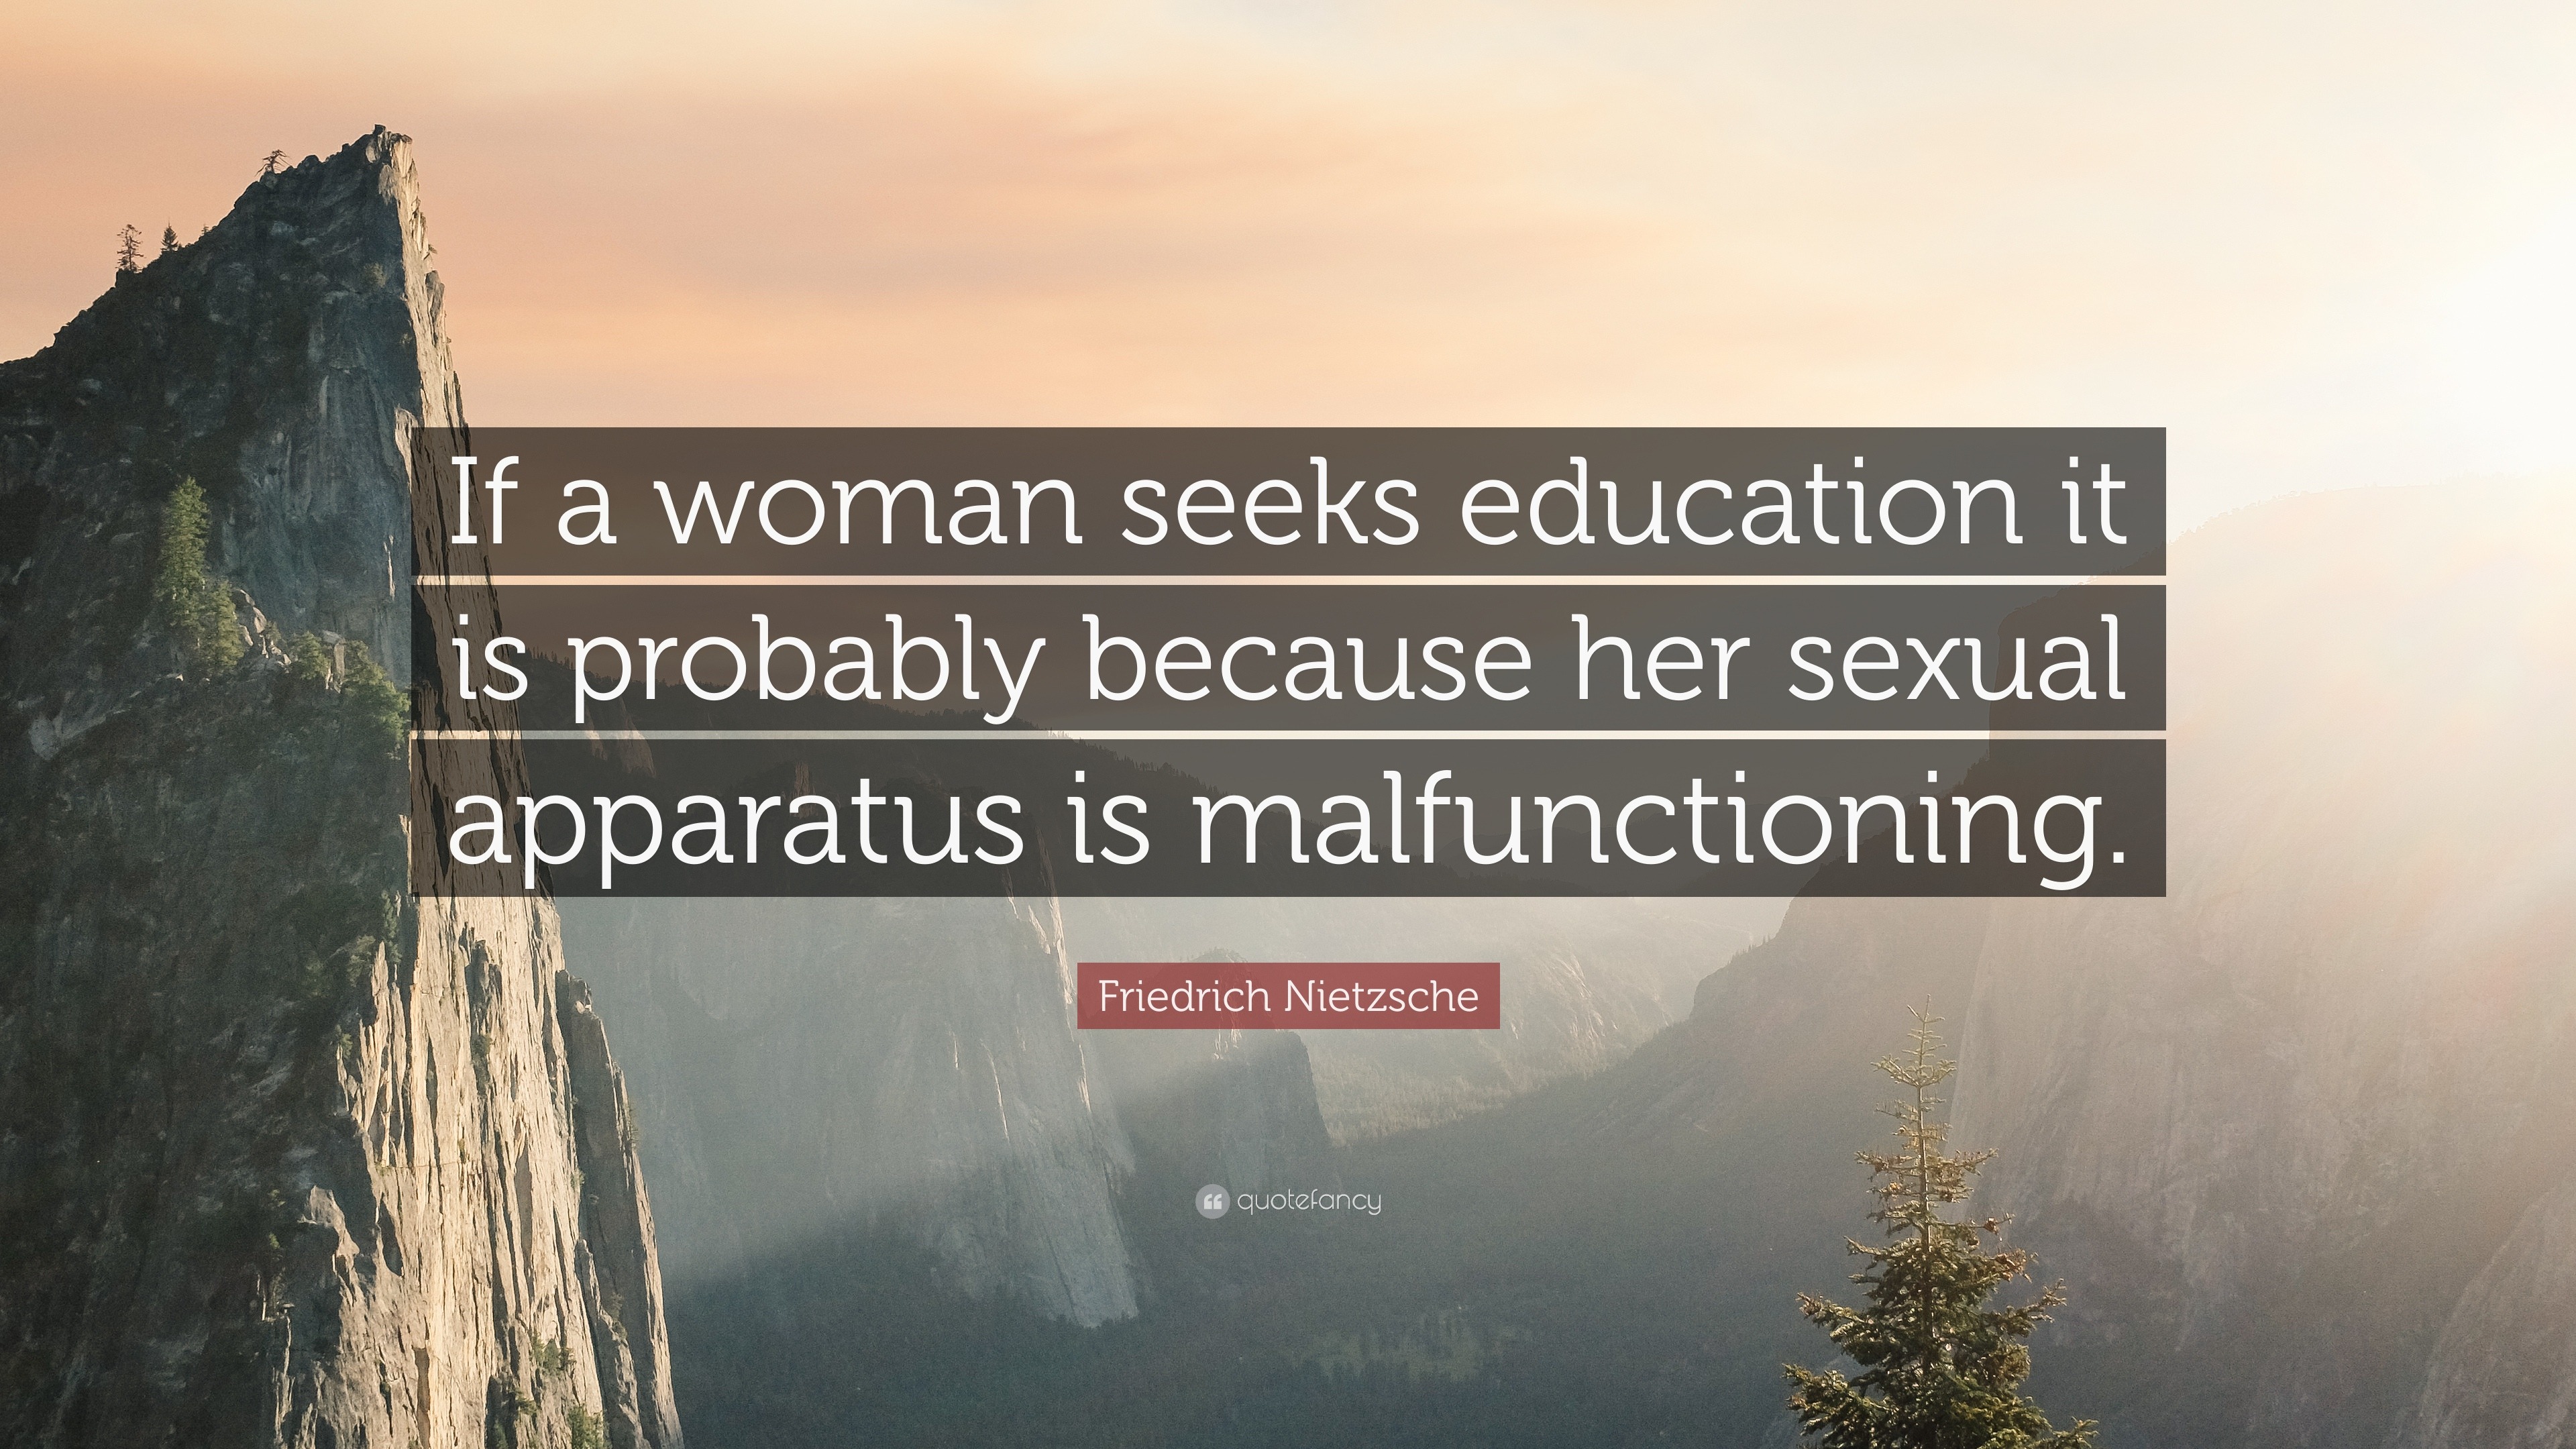 Friedrich Nietzsche Quote “if A Woman Seeks Education It Is Probably Because Her Sexual 3751